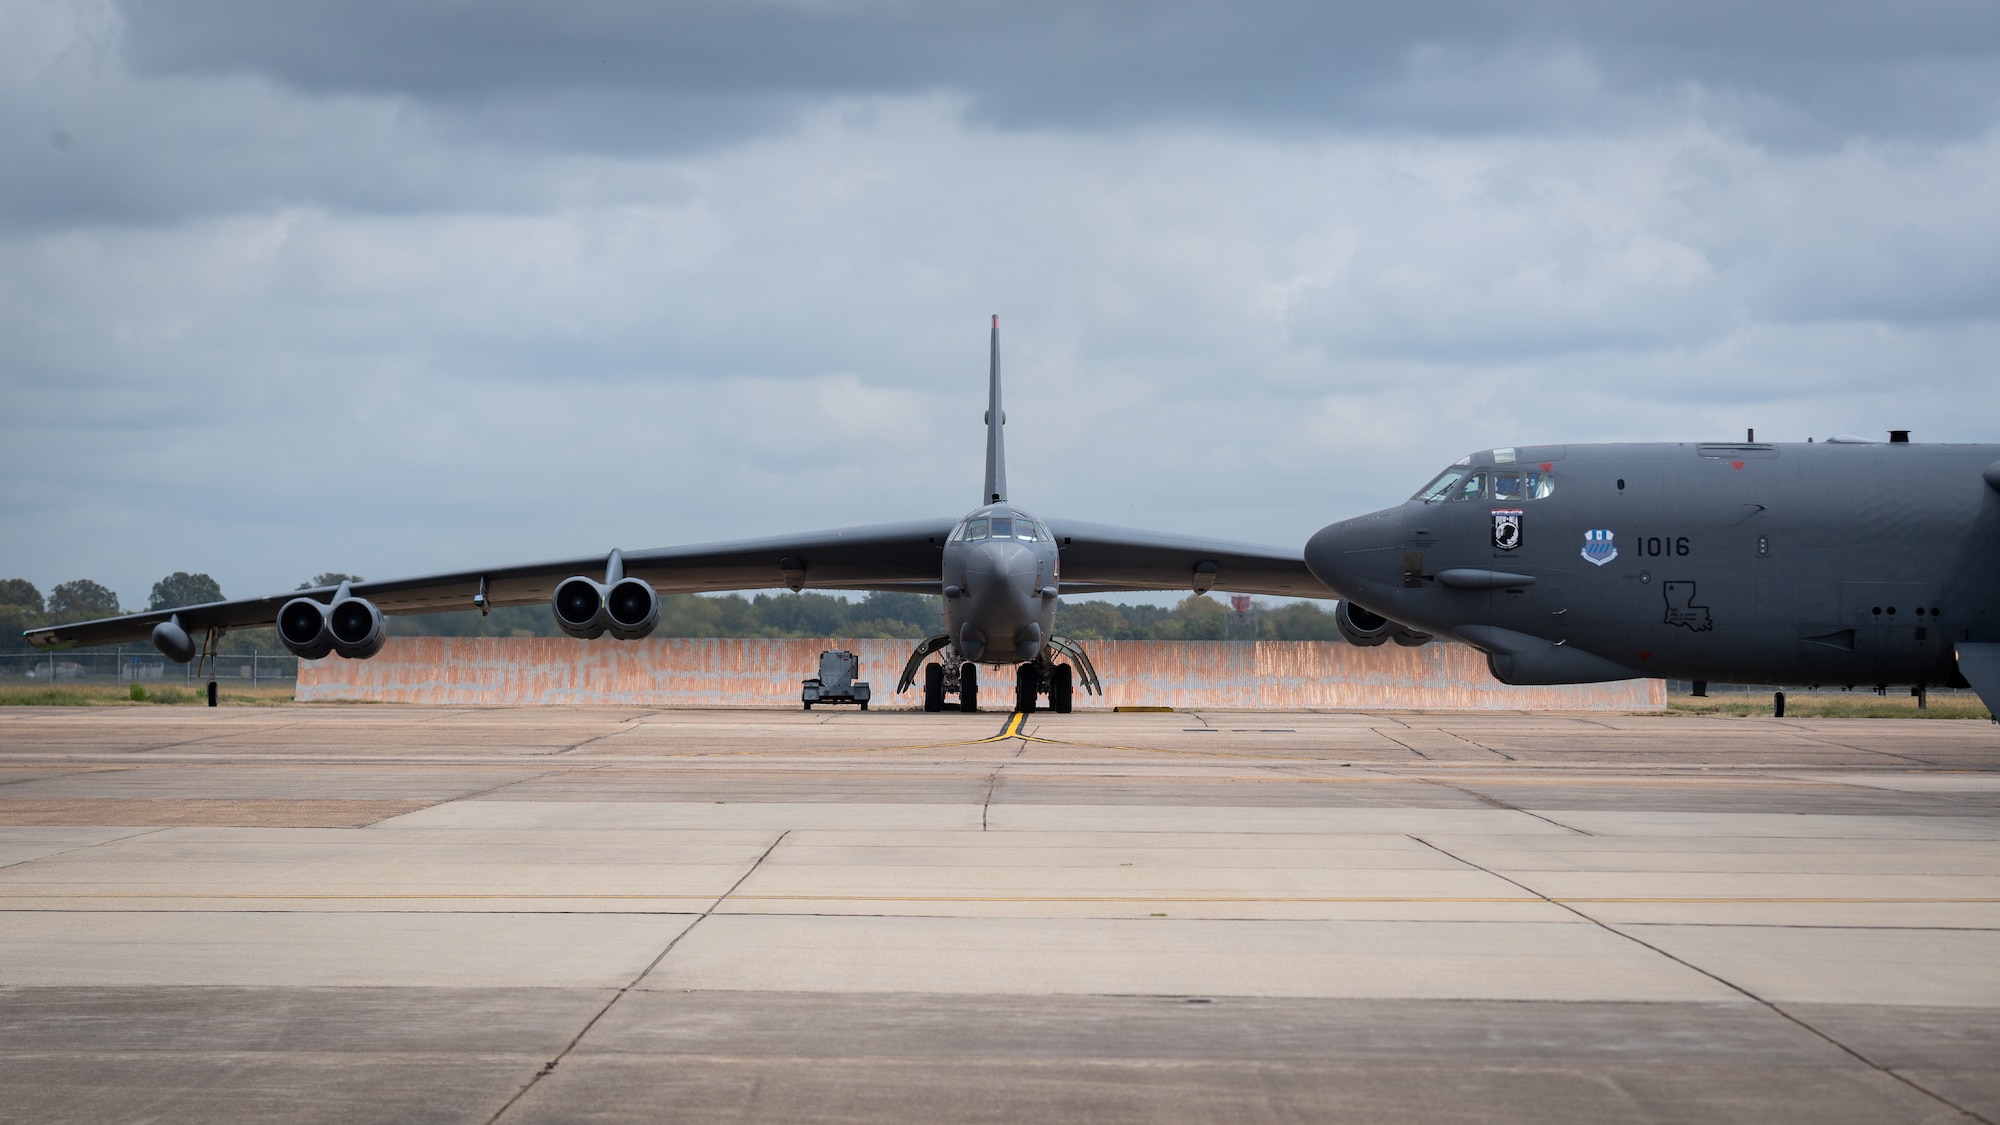 A B-52H Stratofortress taxis down the flight line during Global Thunder 21 at Barksdale Air Force Base, La., Oct. 23, 2020. The ability to credibly convey the readiness and lethality of our forces is a key component of strategic deterrence. (U.S. Air Force photo by Senior Airman Lillian Miller)